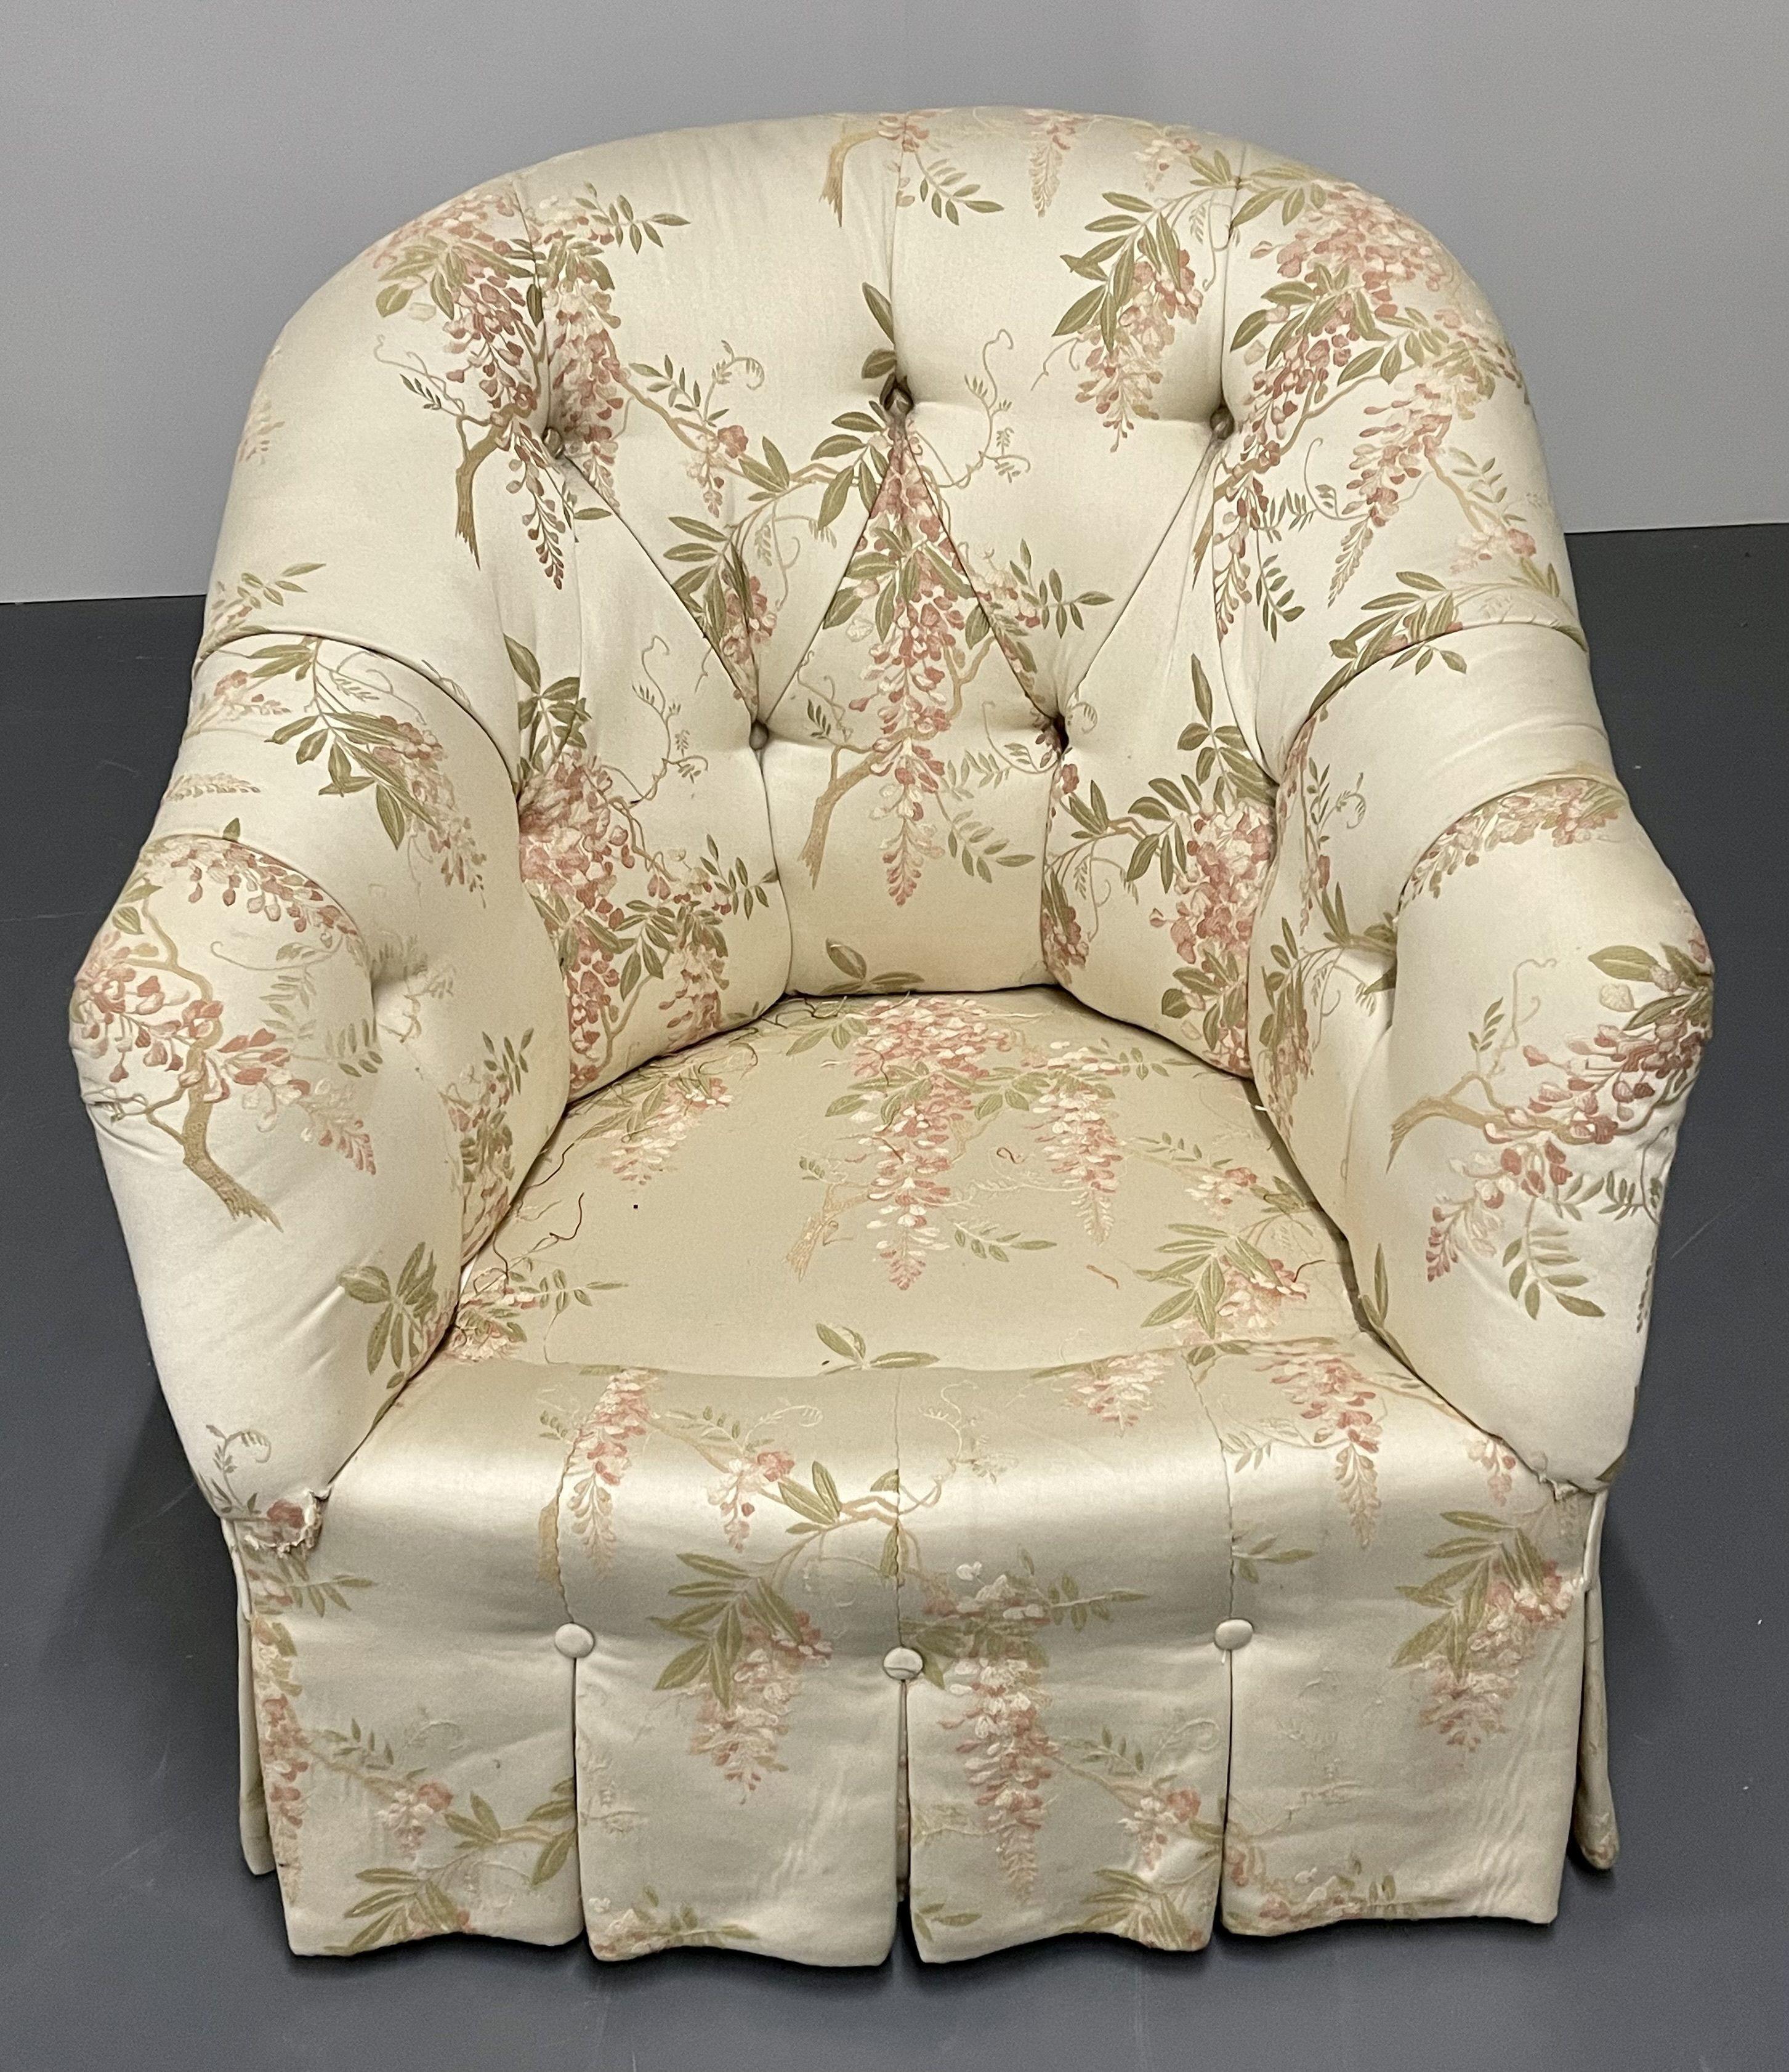 20th Century Pair of Floral Swivel Chairs, Milo Baughman, Scalamandré, Lounge Chairs